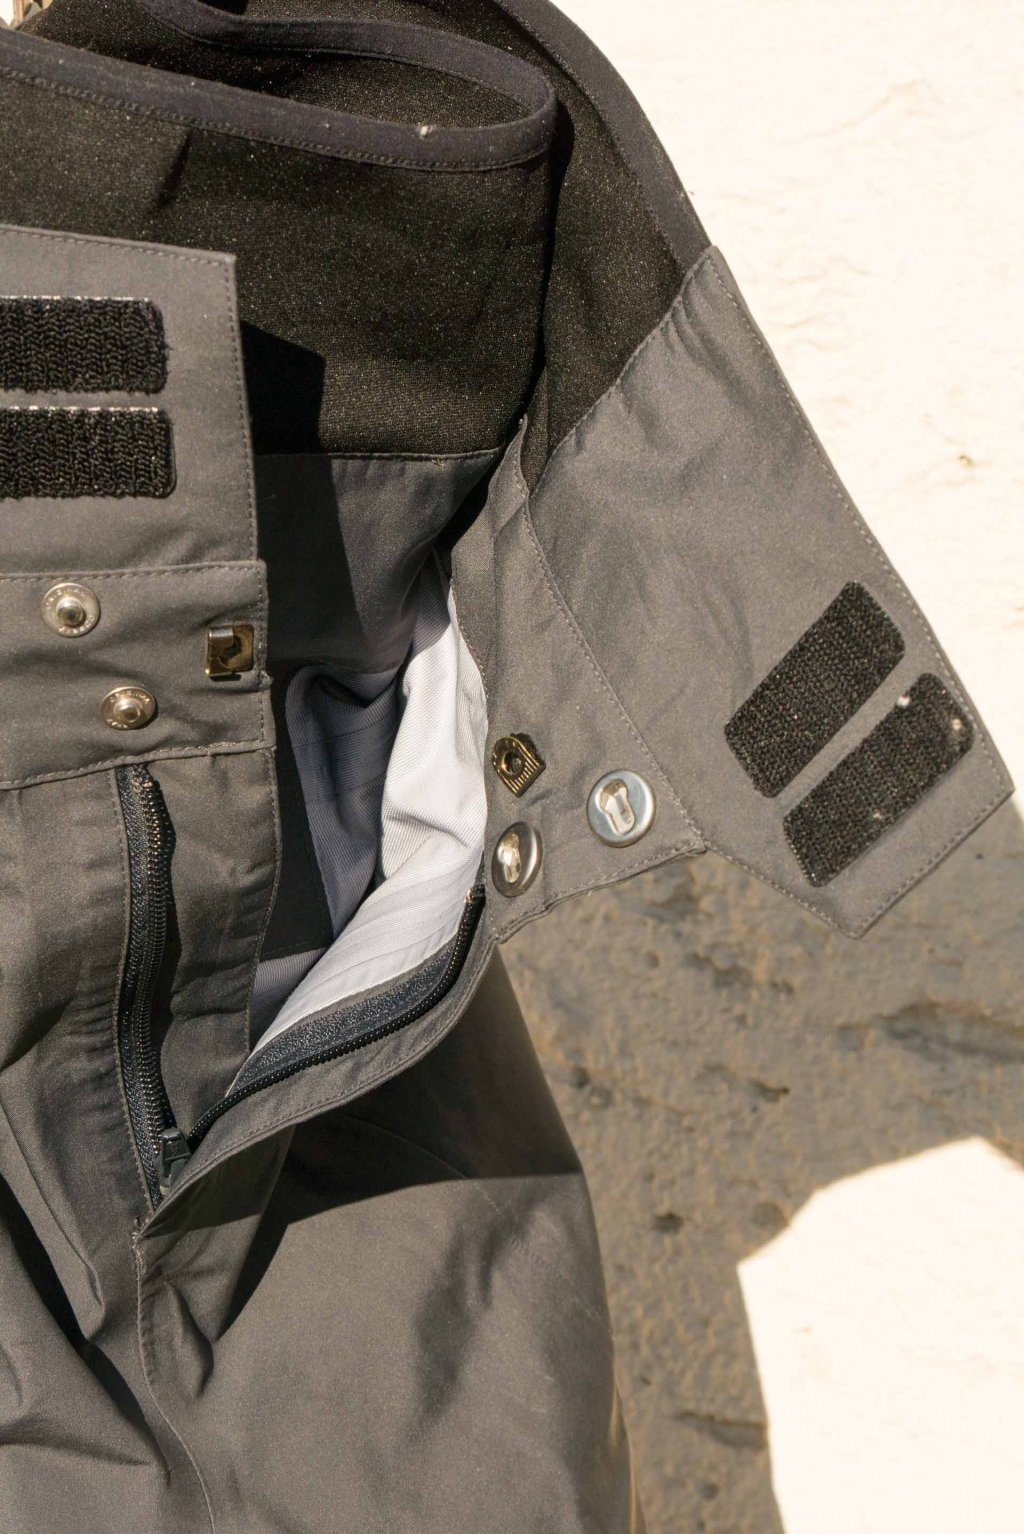 One slide and two slide/push buttons as well as a Velcro fastener close the trousers securely.